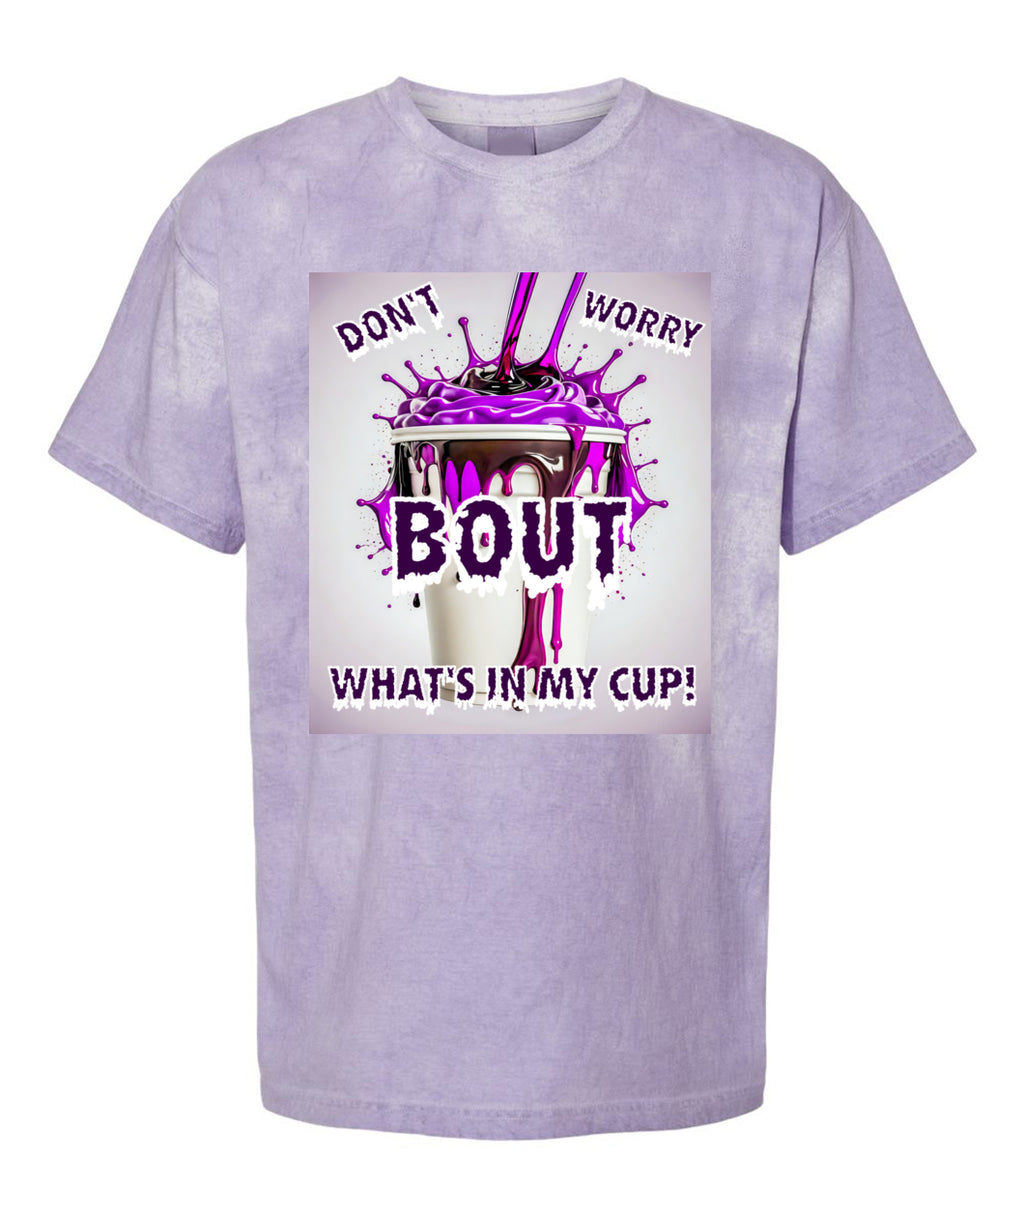 Purple Syrup Cup Design Unisex Blast T-Shirt by Burning Guitars